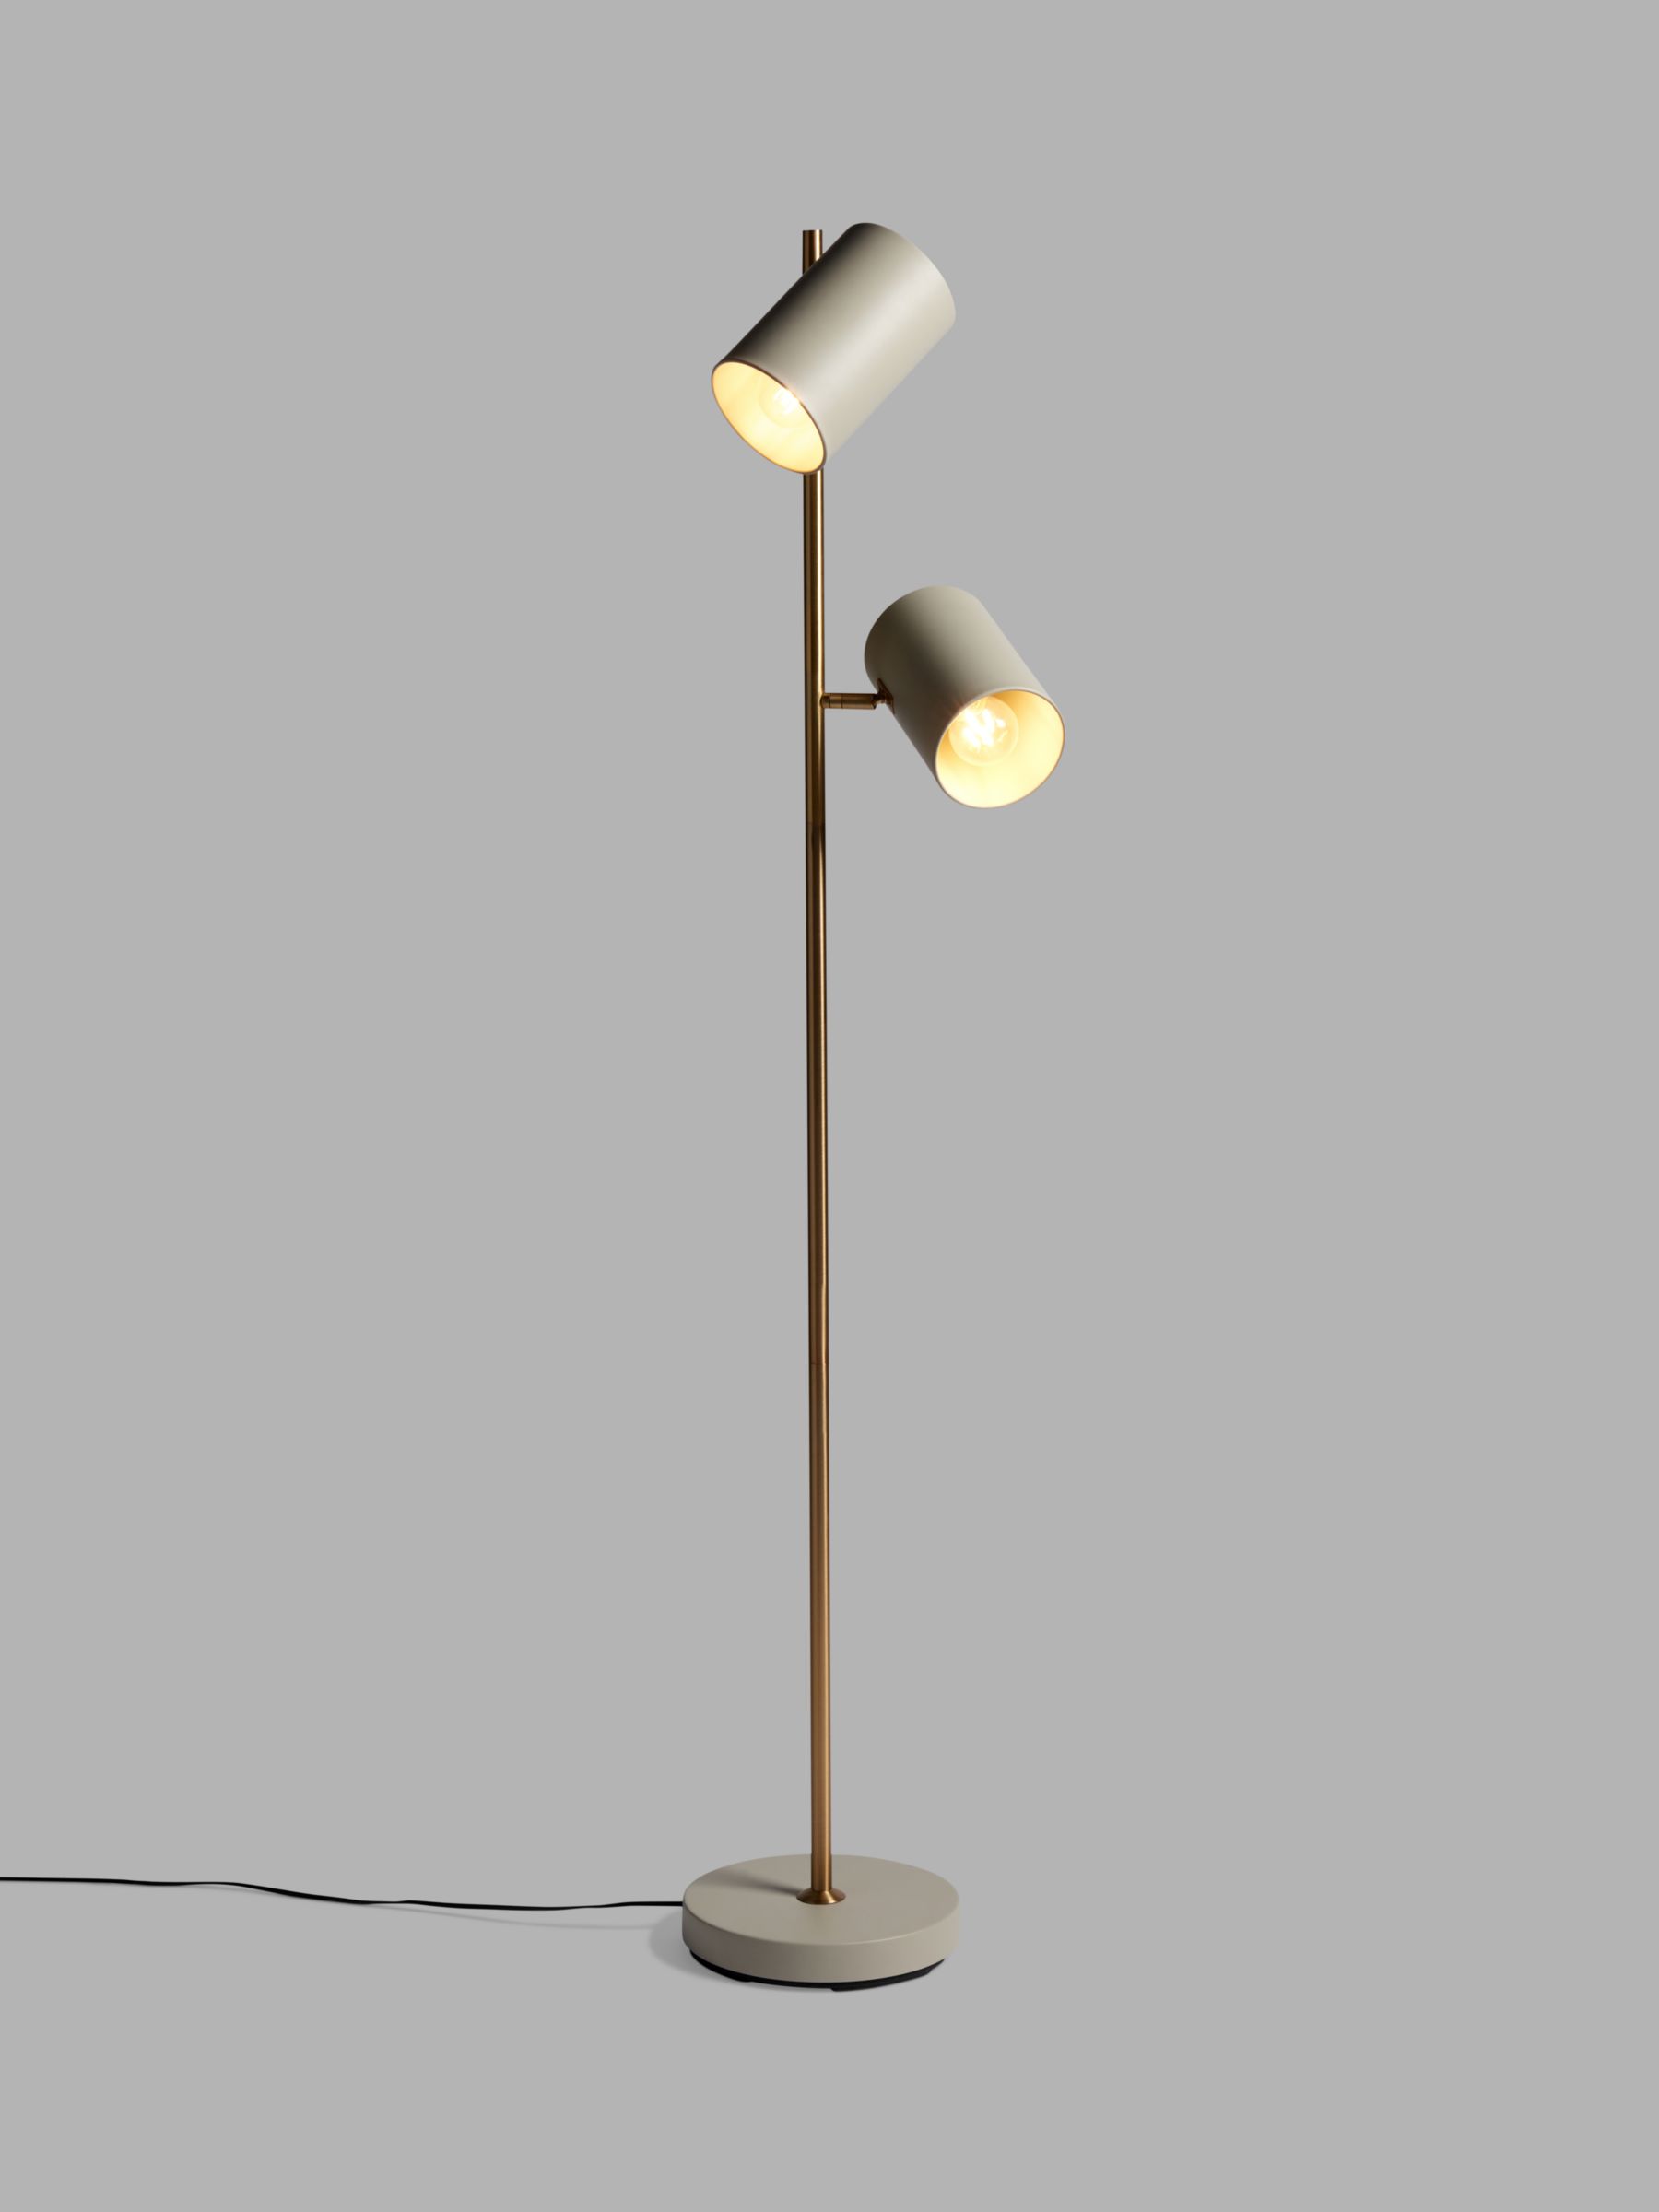 ANYDAY John Lewis & Partners Dual Head Floor Lamp, Putty/Brass